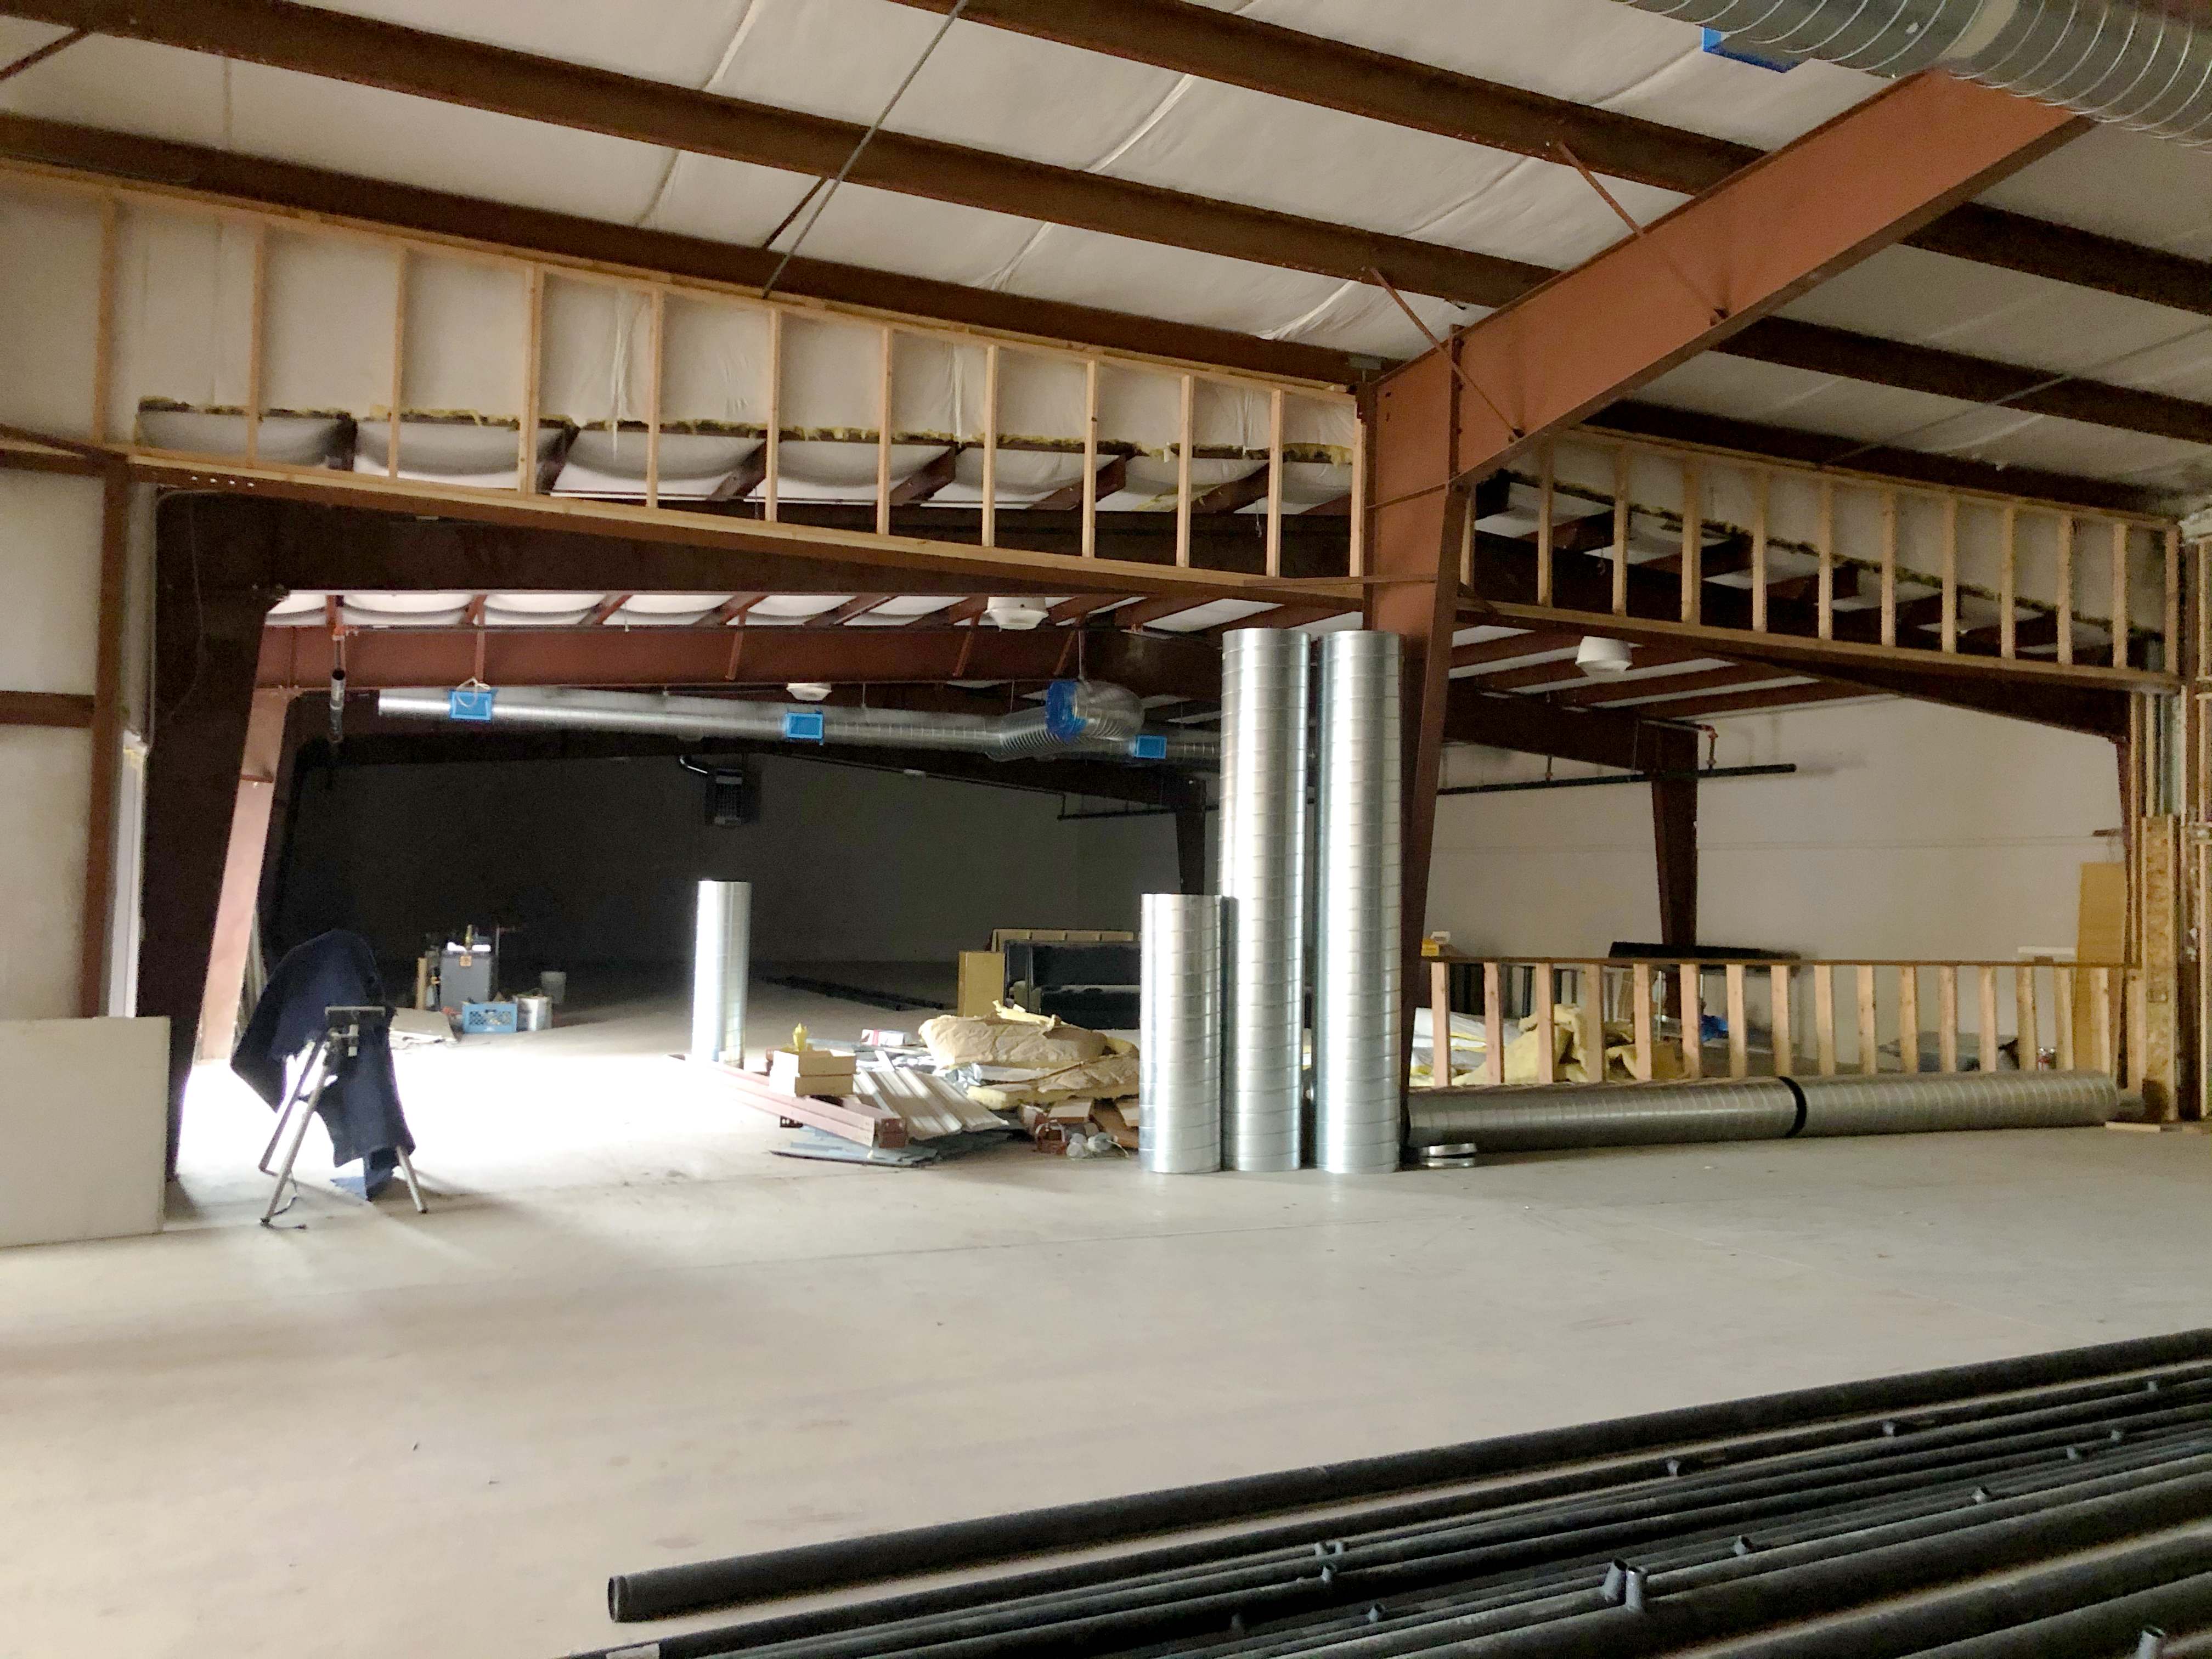 Walls, siding, and the vaulted ceilings are beginning to come together in this construction photo, separation between the center’s different activities becomes apparent